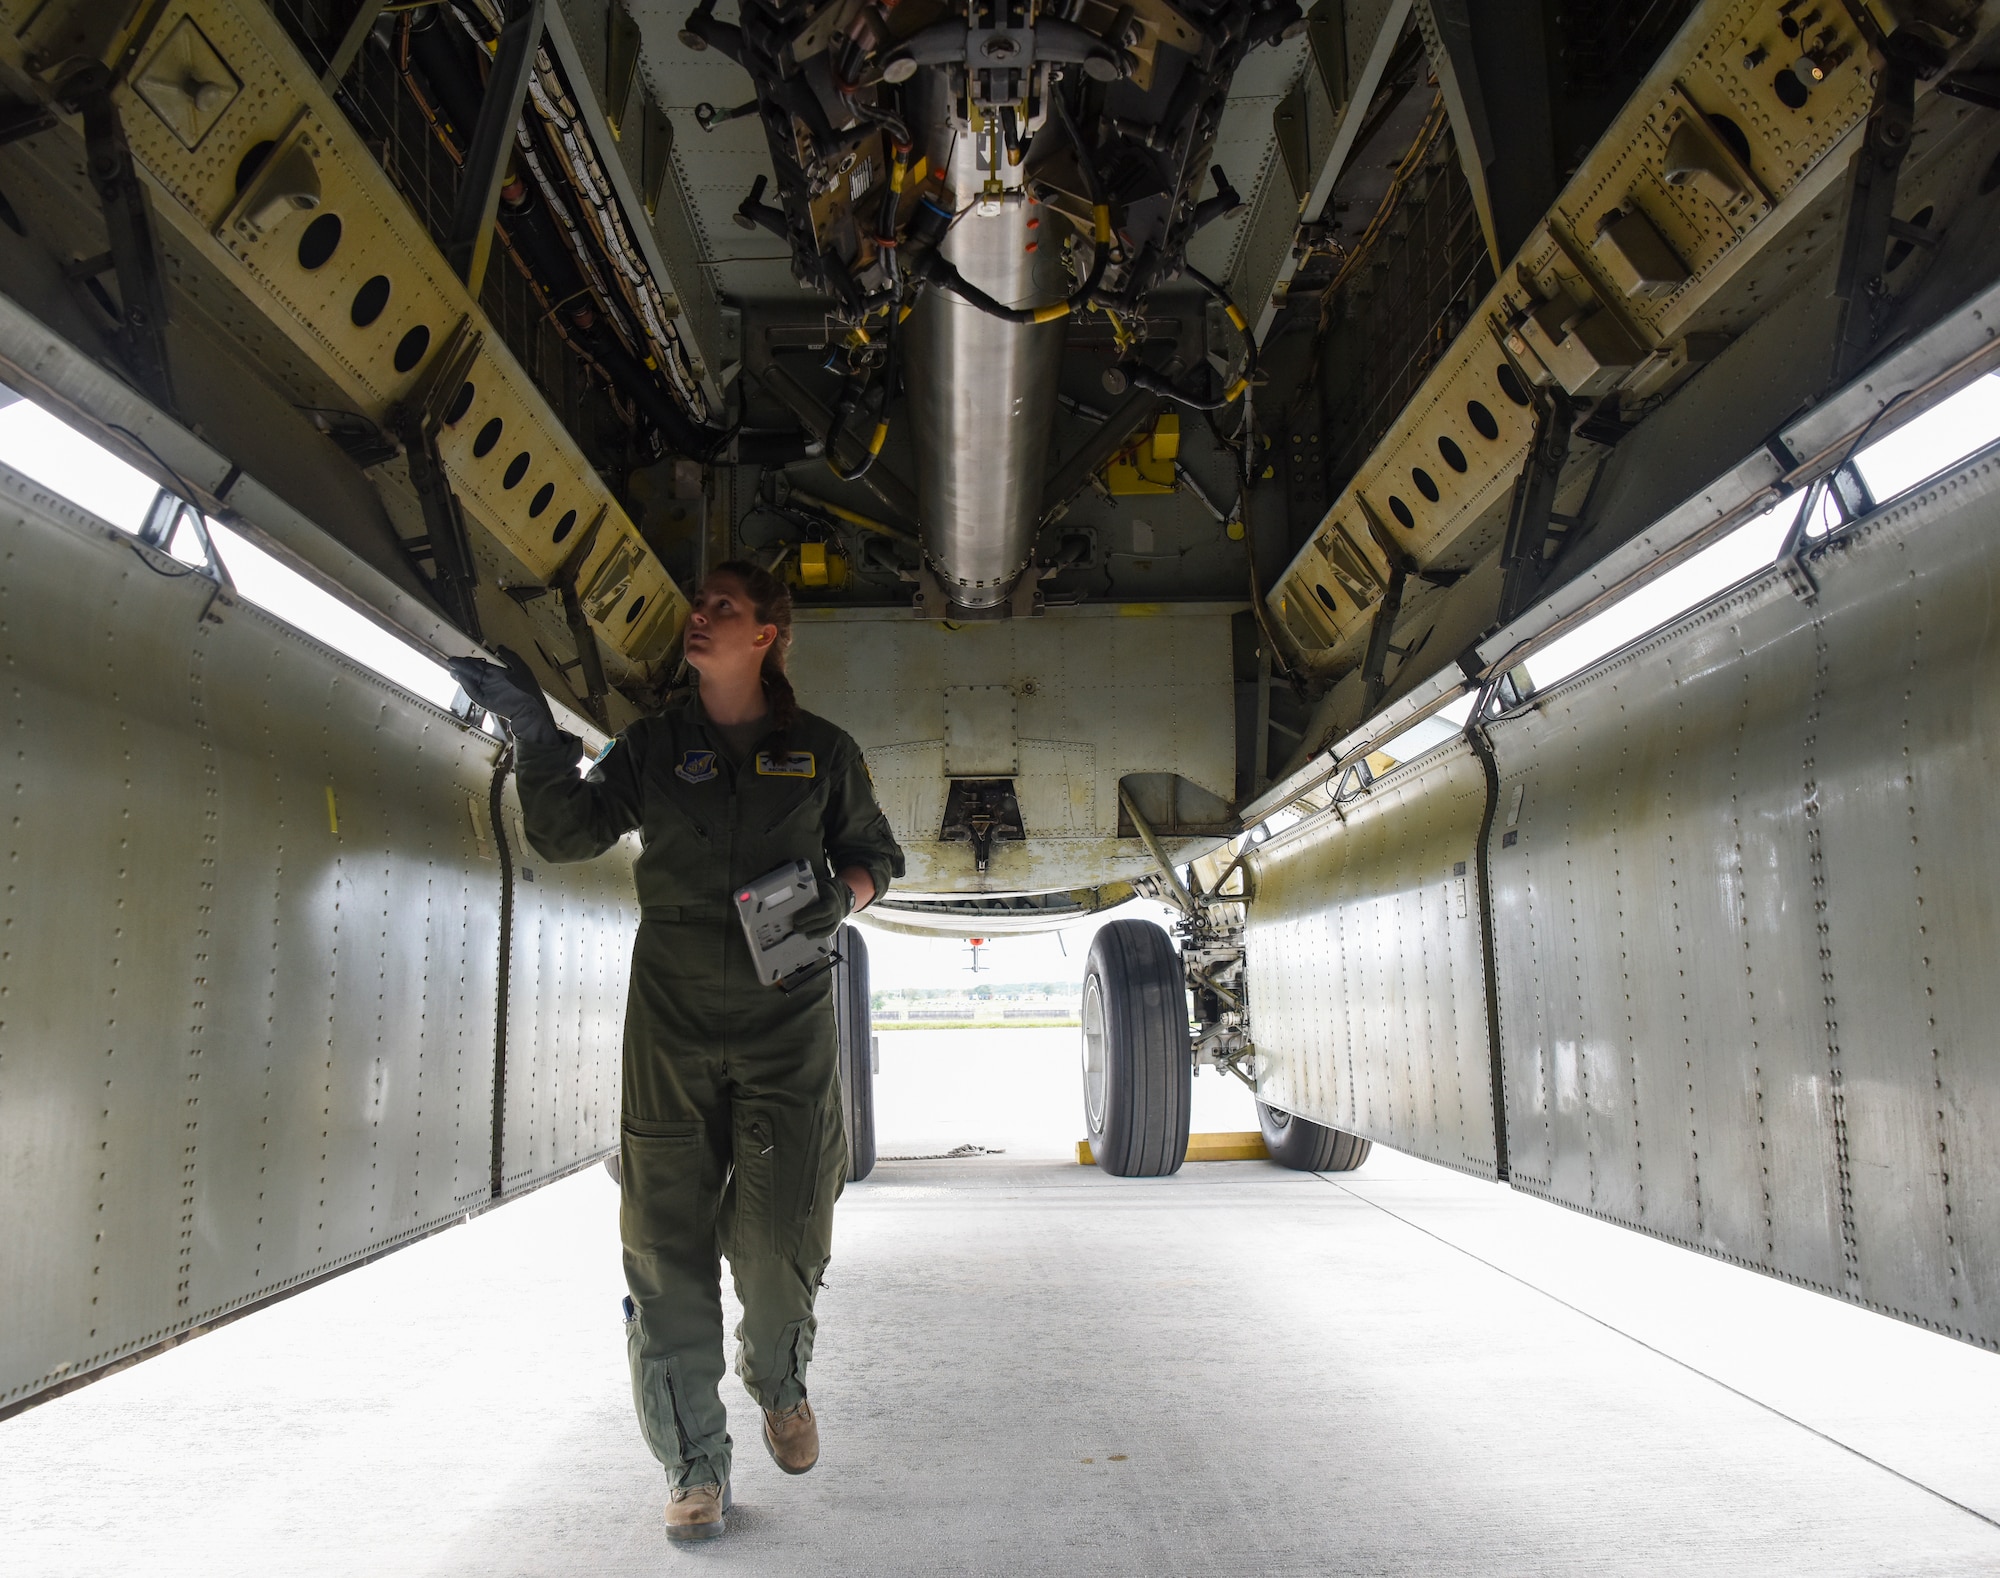 Capt. Rachel Long, 69th Expeditionary Bomb Squadron radar navigation officer, performs a pre-flight check in a B-52 Stratofortress’ bomb bay on Andersen Air Force Base, Guam, Oct. 22, 2019. The 69th EBS flies B-52s in support of the Continuous Bomber Presence, a mission that routinely forward deploys aircraft in support of global strike capability and regional security to our allies. (U.S. Air Force photo by Airman 1st Class Michael S. Murphy)